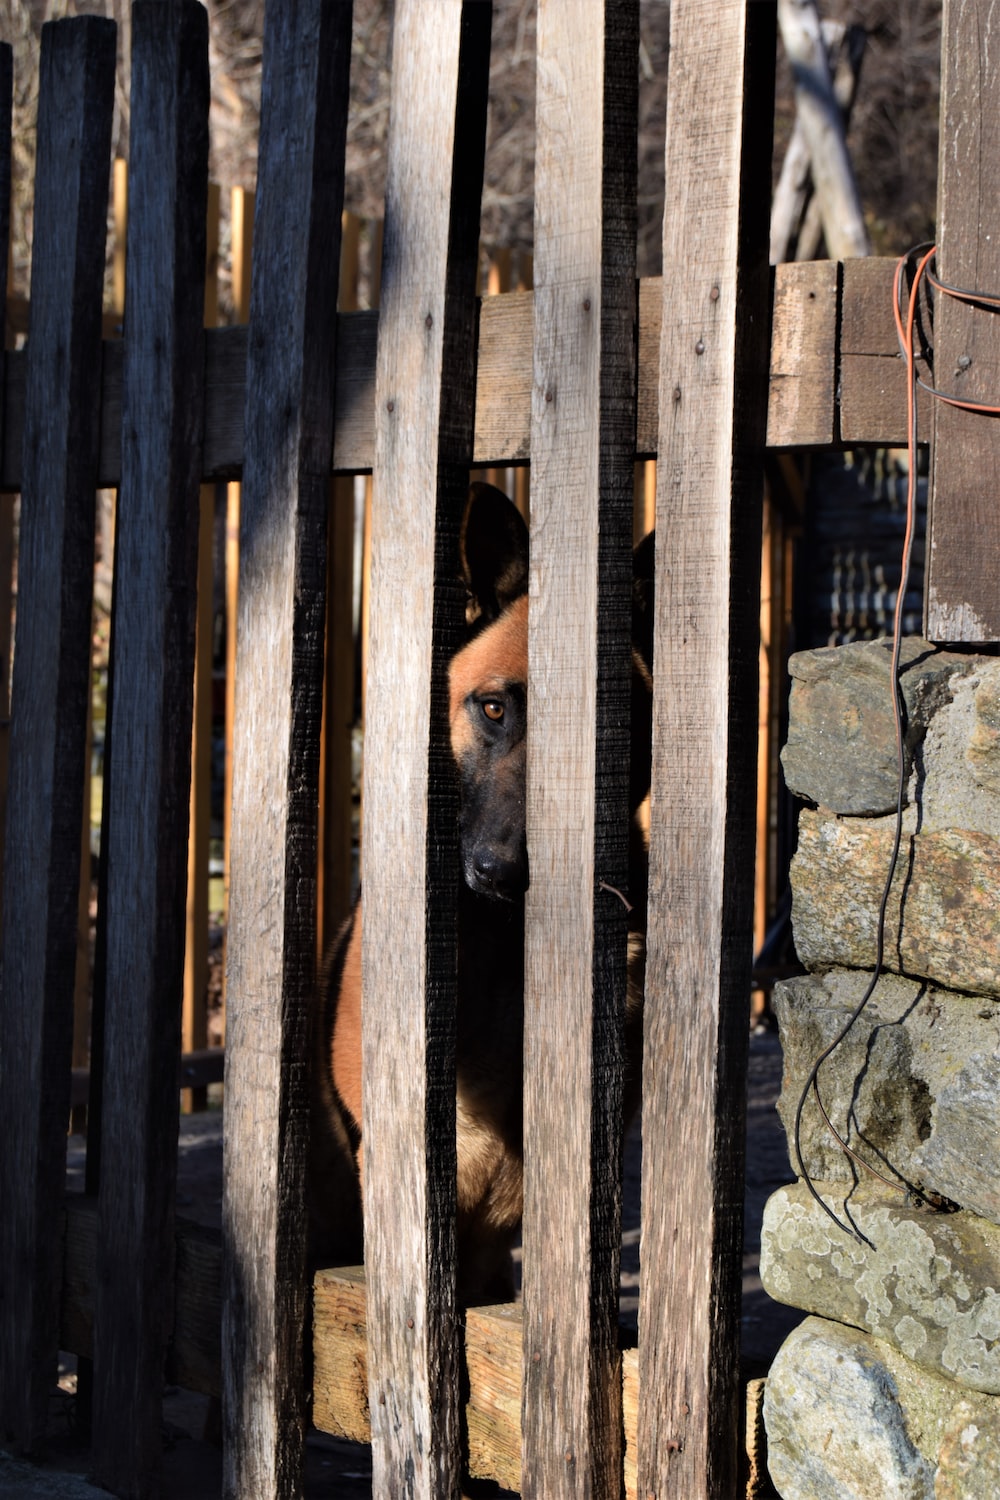 a dog peeking out from behind a wooden fence